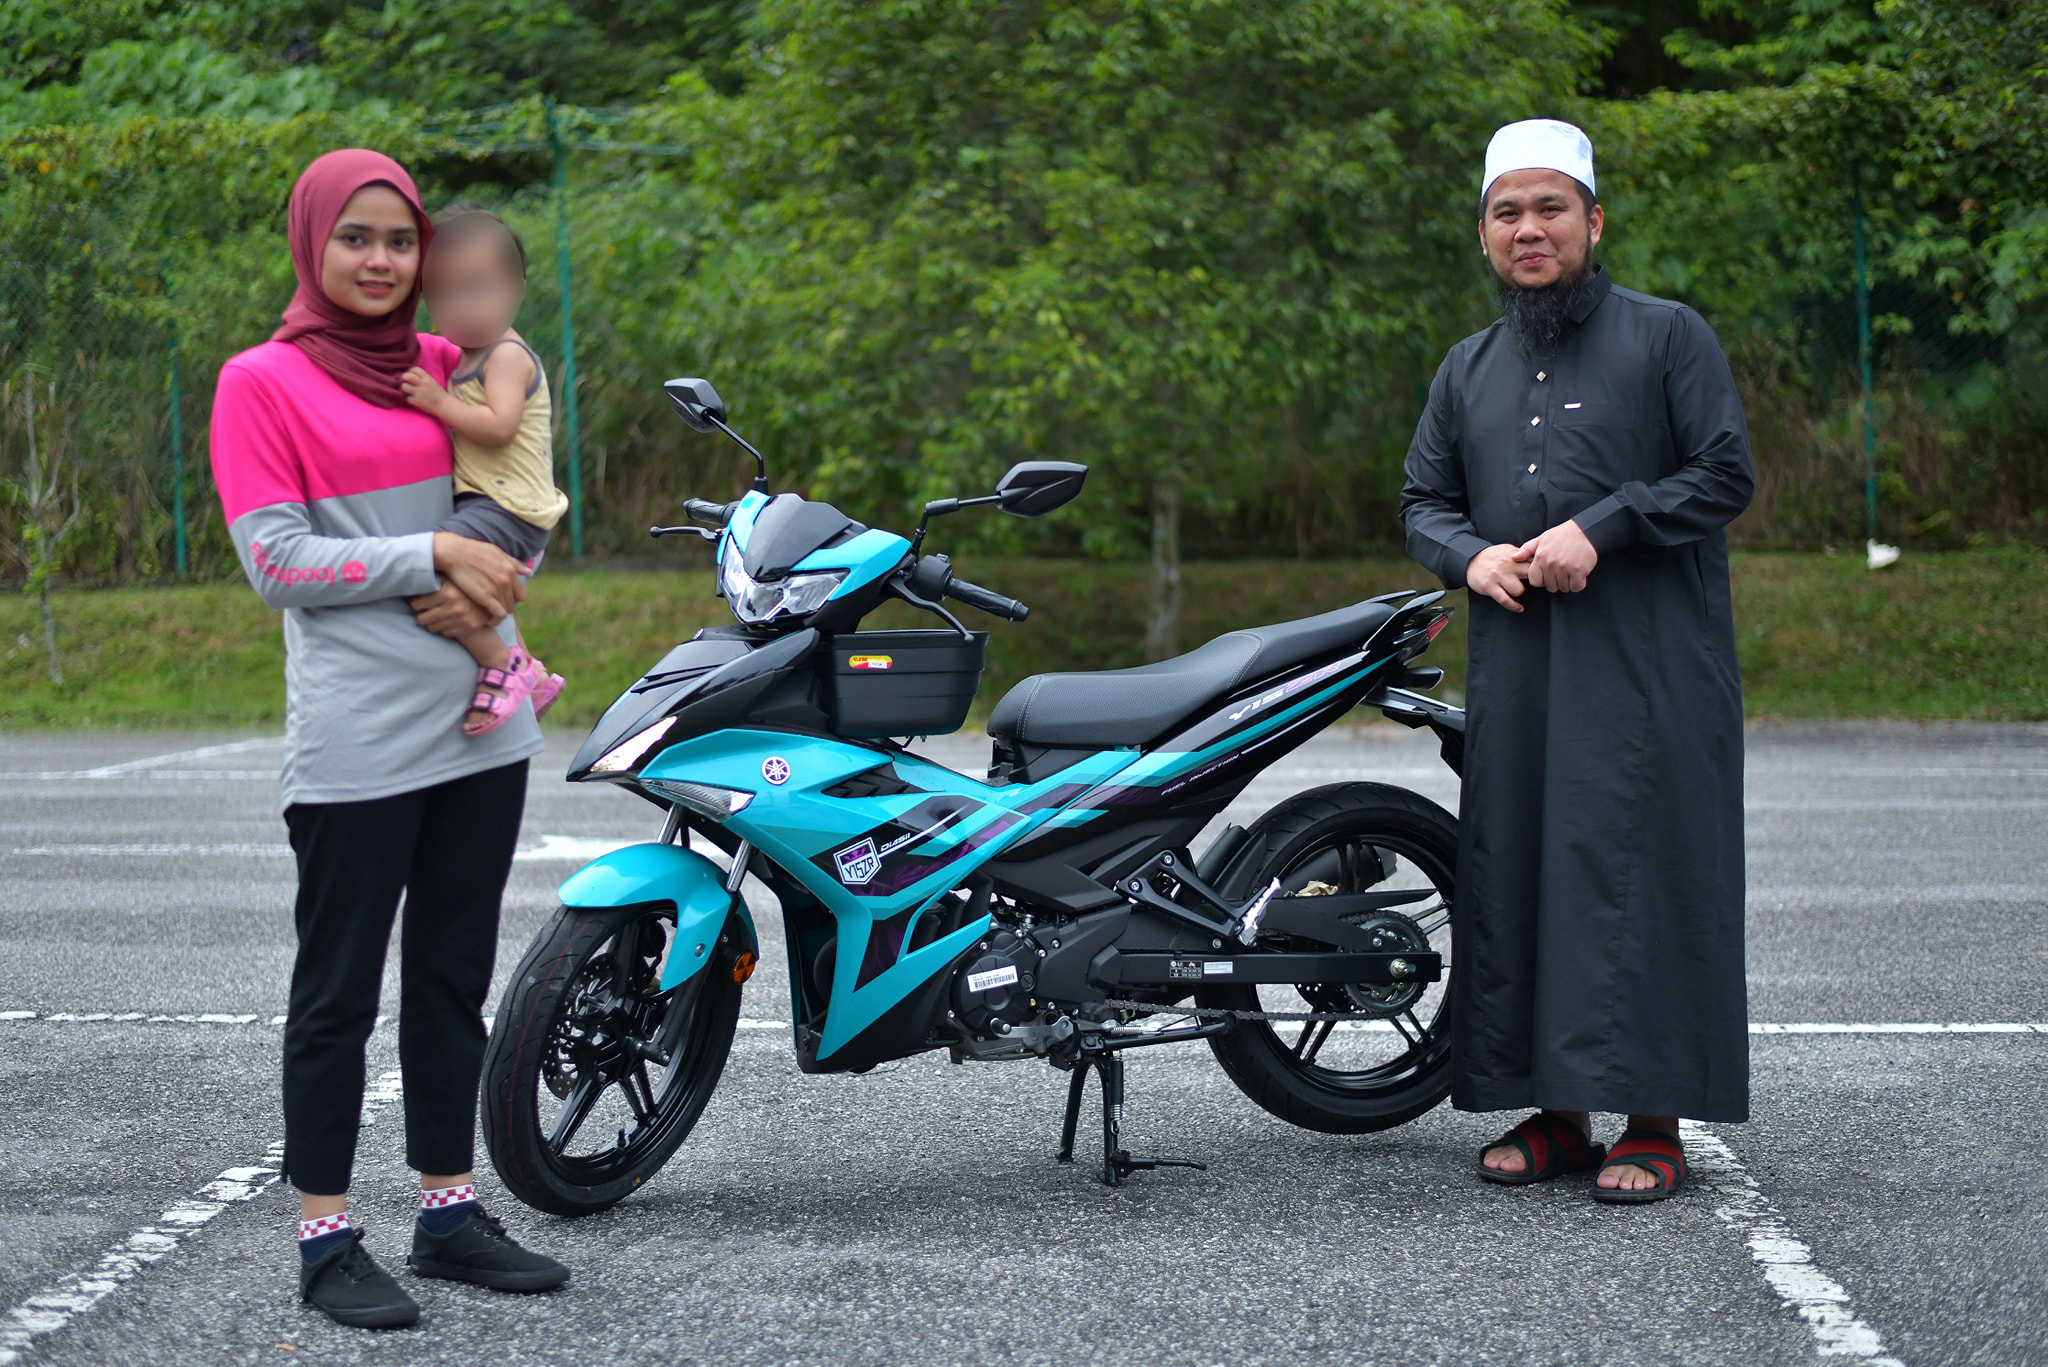 In learning about the challenges she faced, Ebit gifted the single mum a brand-new motorbike to help her with her deliveries. Image credit: Ebit Lew